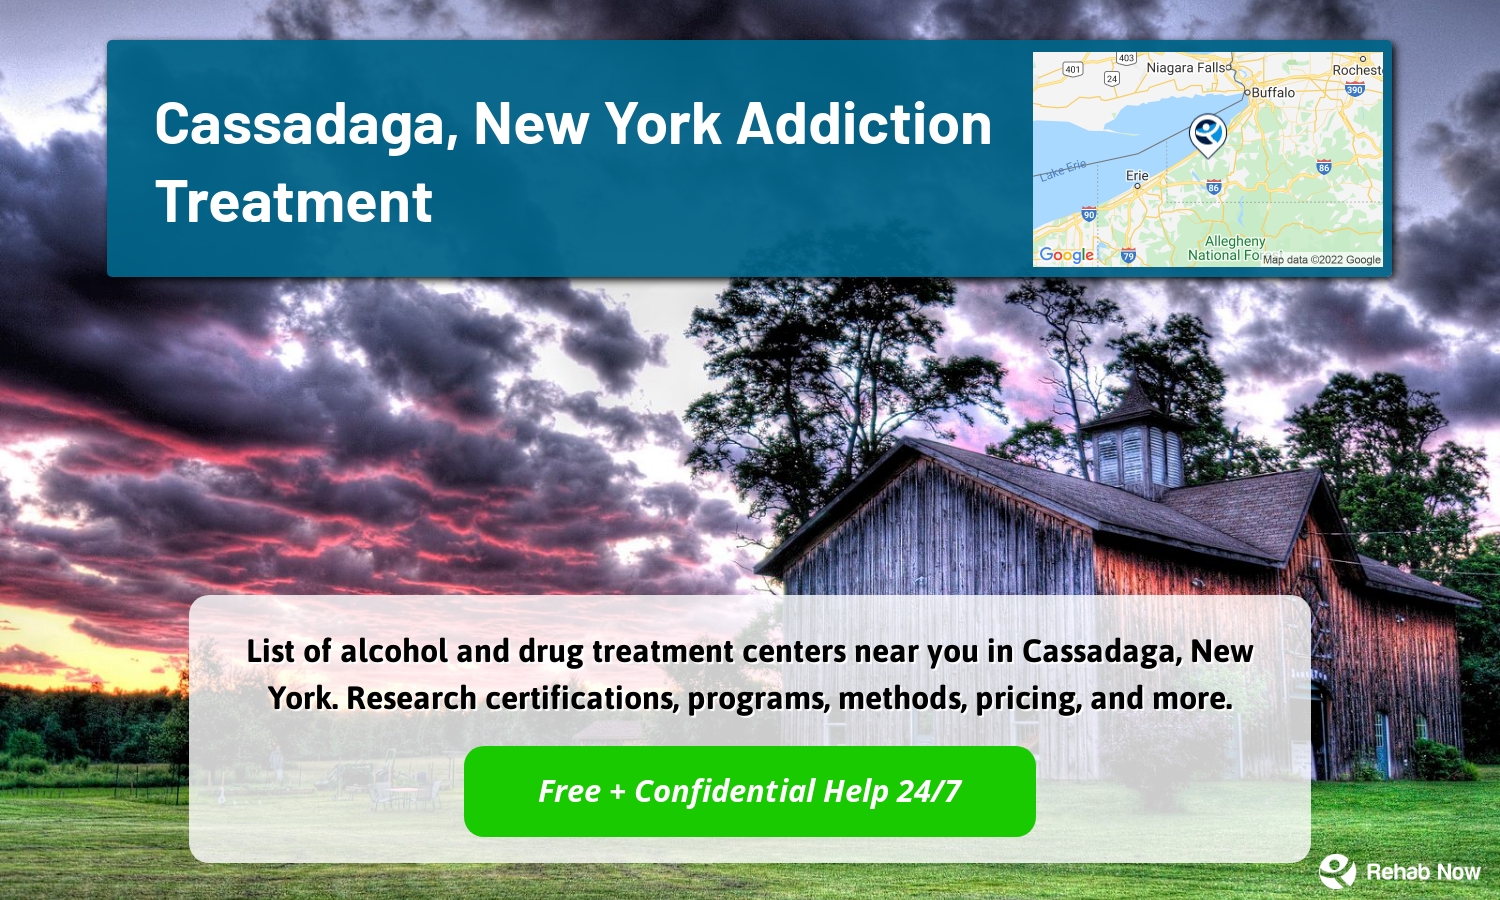 List of alcohol and drug treatment centers near you in Cassadaga, New York. Research certifications, programs, methods, pricing, and more.